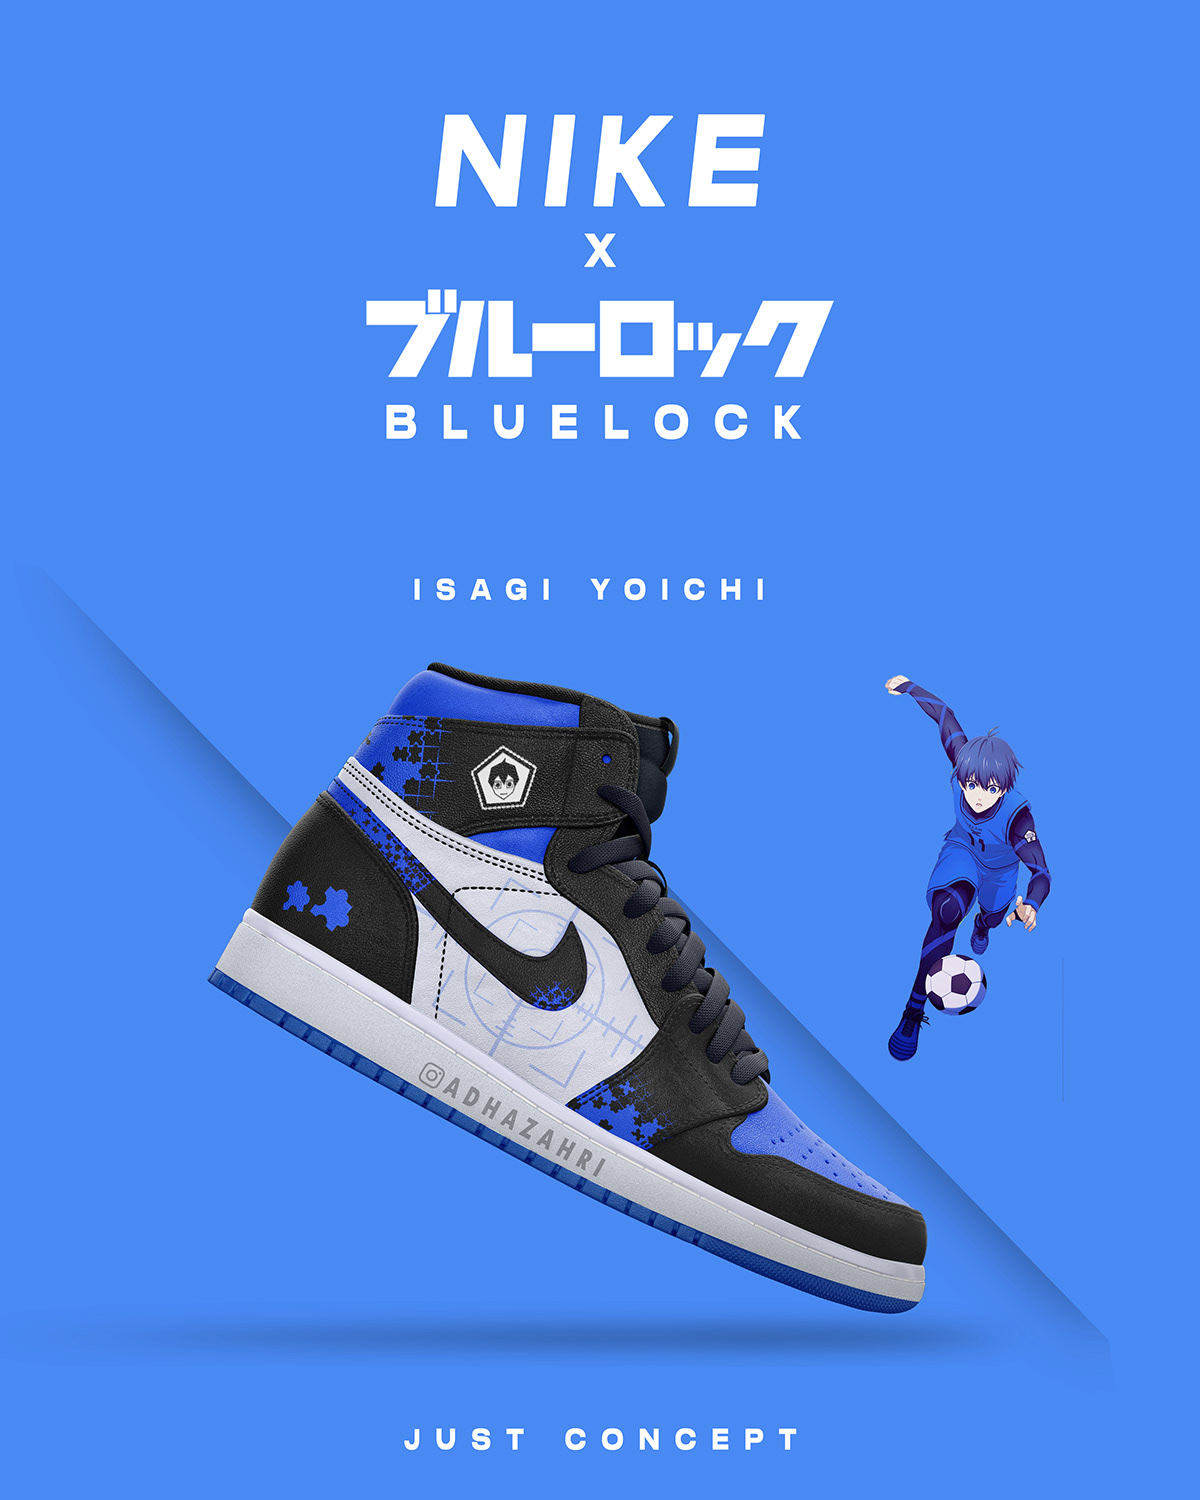 Nike X Blue Lock Collaboration Concept on Behance